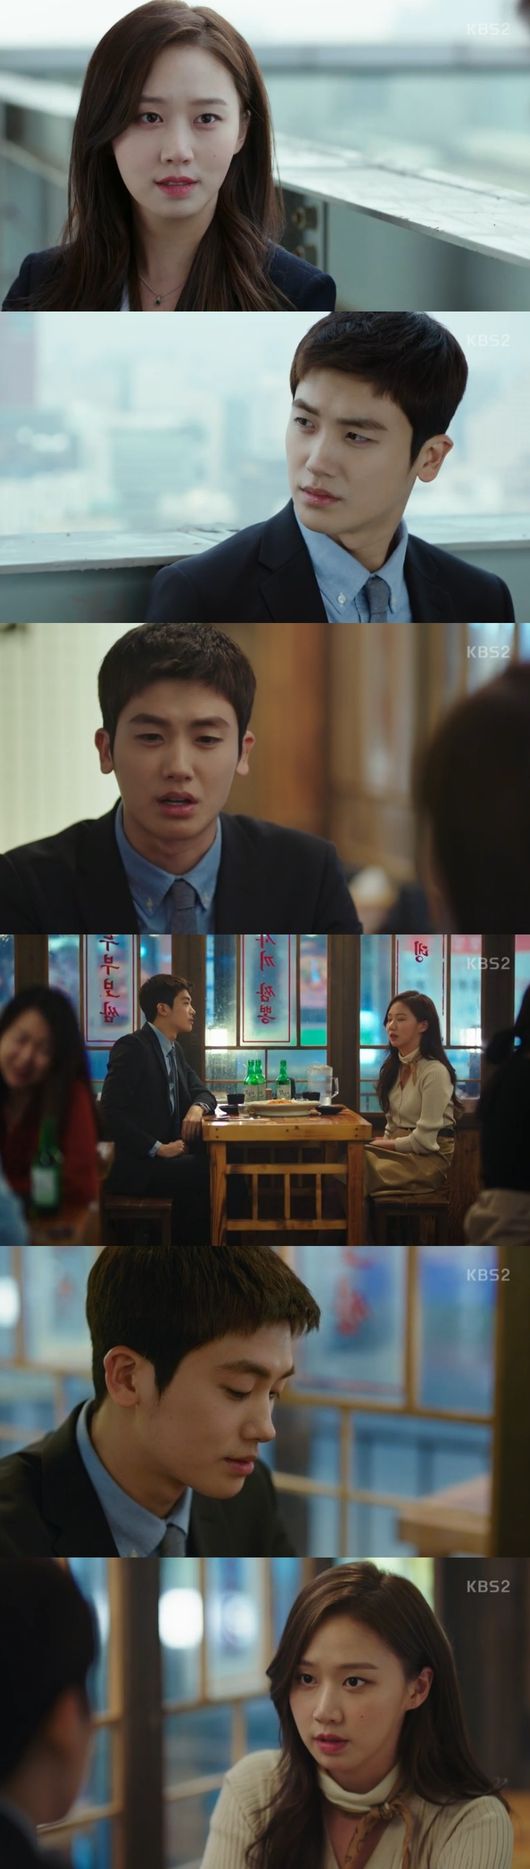 Park Hyung-sik and Ko Sung-hee shared their pain and showed closer.Park Hyung-sik revealed that his parents had returned to a traffic accident at the same time, and Ko Sung-hee also talked about his failure to become a lawyer due to test phobia.The two men opened their hearts with sympathy for each other. In the KBS2 drama Suits broadcast on the 3rd, Kang Suk (Jang Dong-gun) and Yeon Woo (Park Hyung-sik) were portrayed in resolving the divorce lawsuit against the ship Ada Lovelace (Son Sook) and the former couple, Zhu Xi (Zhu Xi) in the process. Jang Shin-young) The two men who met as opposing lawyers recall the past, and Zhu Xi shakes Kang Suk, suggesting that Kang Suk still has a heart.Kang Suk knows that the parties in the lawsuit before going to trial actually love each other and decided to divorce in consideration of each other. The fact was revealed just before the trial, and the woman left with tears.That evening Zhu Xi and Kang Suk drank, and Zhu Xi reportedly said, I lost; I didnt know you would come out of your mouth to the word love.That day Zhu Xi sleeps with Kang Suk, and Zhu Xi surprises Kang Suk by saying, Im getting married.Kang Suk asks, What would you do if I caught him? And Zhu Xi said, It hurts to fight now to laugh with you, too. Yeon Woo said, the ship Kang Suk had ordered The Lovelace work is solved.Ada Lovelace is a craftsman who makes traditional chapters, and Kang Suks company has proposed to Ada Lovelace to establish a corporation in the United States.Im old now, I want to be with my grandchildren, says Bae Ada Lovelace.But Yeon Woo deliberately calls the children and grandchildren of the ship Ada Lovelace, whose grandchildren broke the pole while playing in the yard of the ship Ada Lovelace, and the ship Ada Lovelace was furious.The children said, What is it with one of those gods? And Ada Lovelace is disappointed with the children who talk about the childlike chapter.Eventually, Ada Lovelace accepted the contract that Yeon Woo had entered into, concluding that business expansion was better than her children.Yon Woo drank with Gina (Ko Sung-hee), who helped her.Gina wonders about the broken clock that Yeon Woo always wears, and Yeon Woo says, My parents died in a traffic accident the same day.At that time, my father was wearing it, and then it broke down and stopped at that time. 